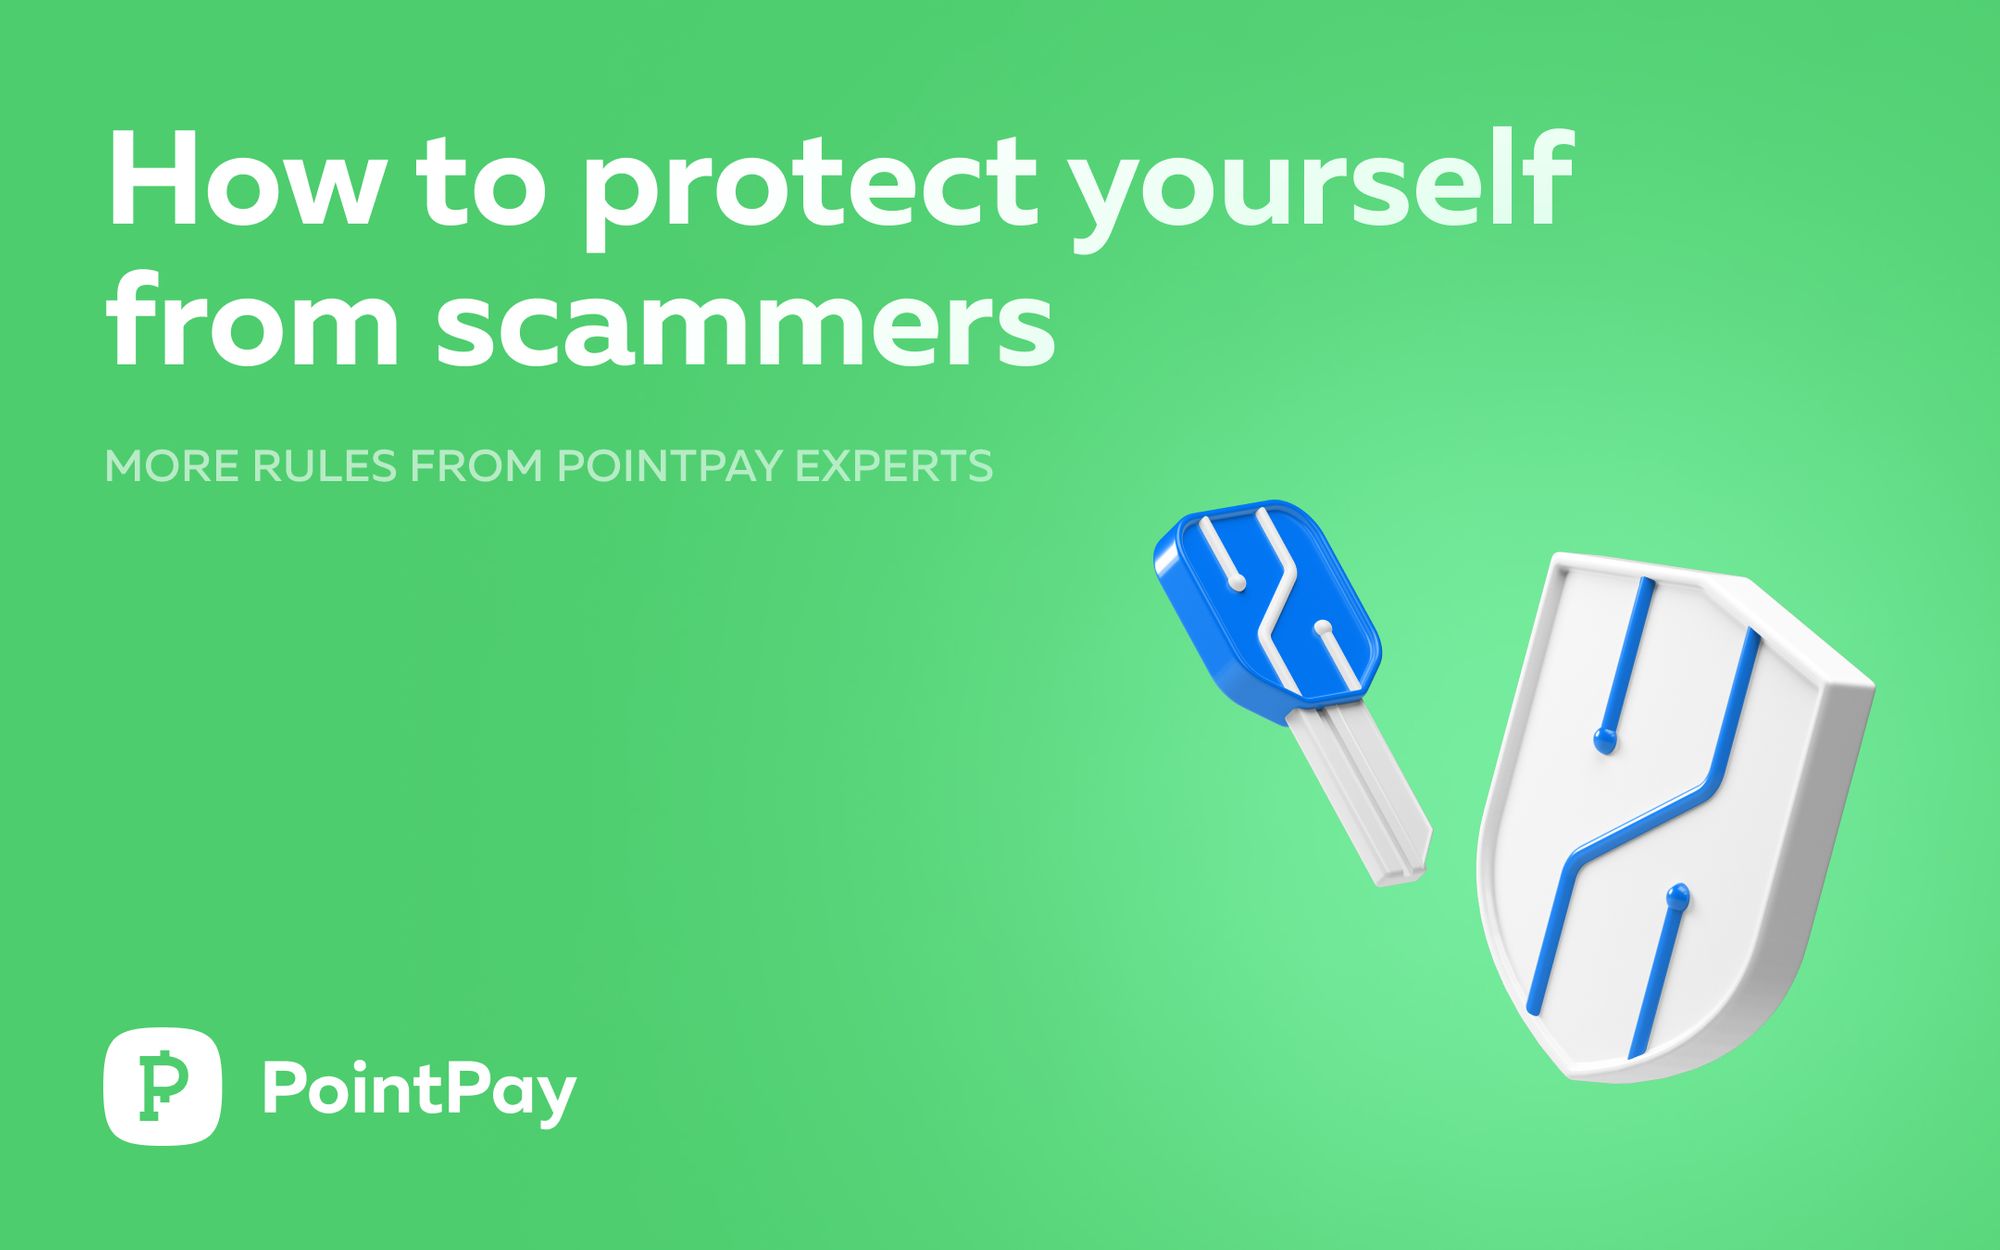 How to Protect Yourself From Scammers? Rules From PointPay Experts